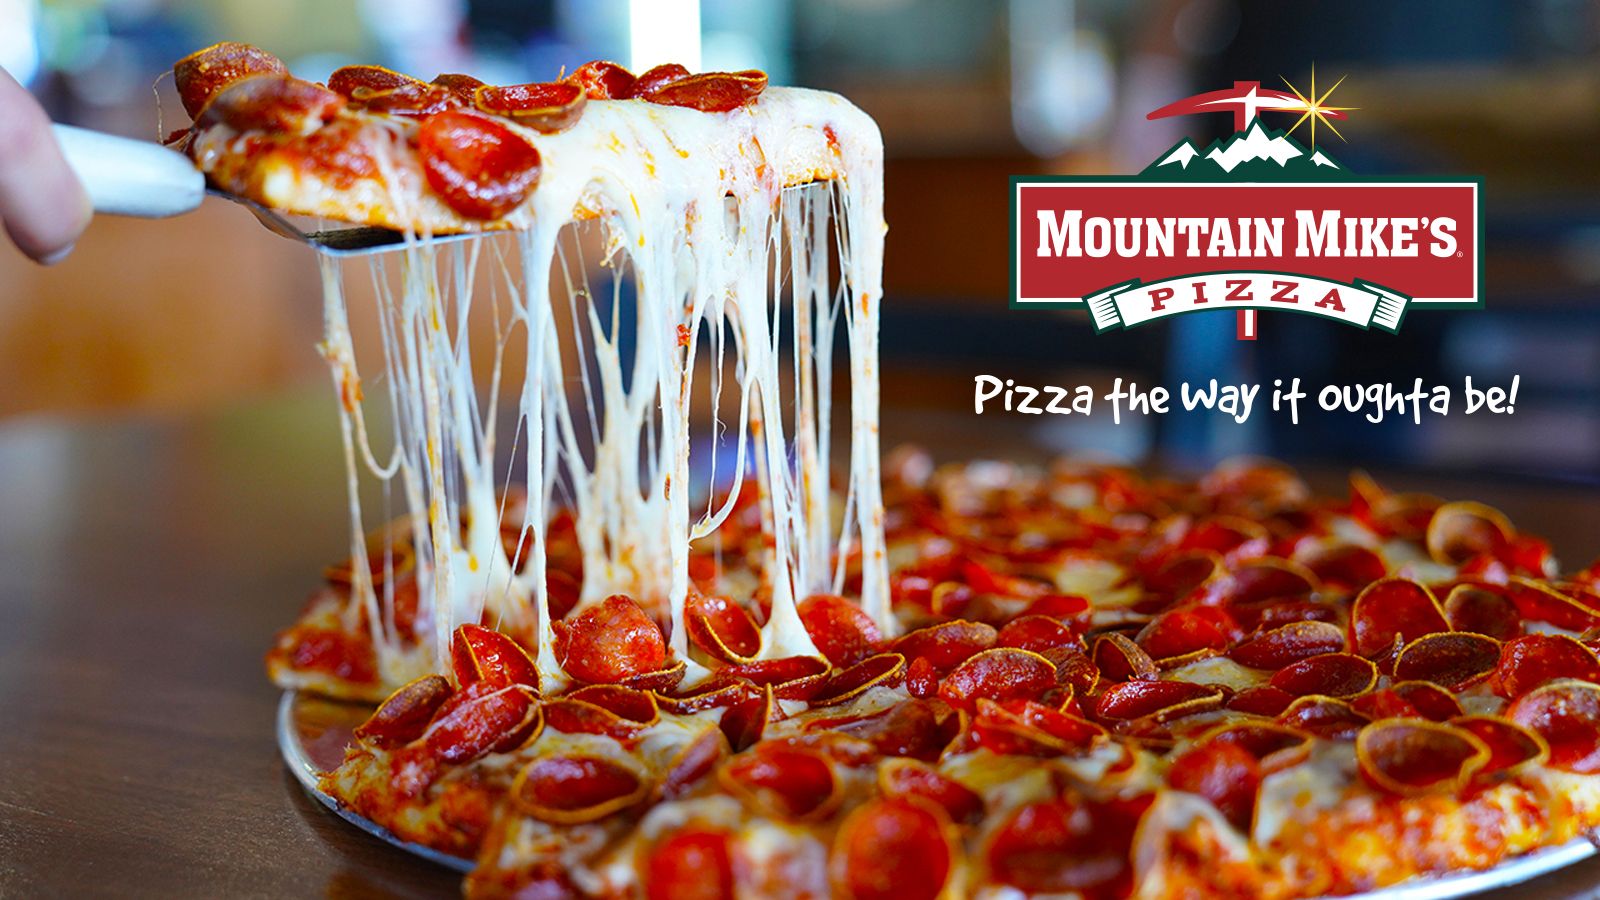 Mountain Mike's Pizza Proudly Expands in Arizona With New Restaurant in Tucson